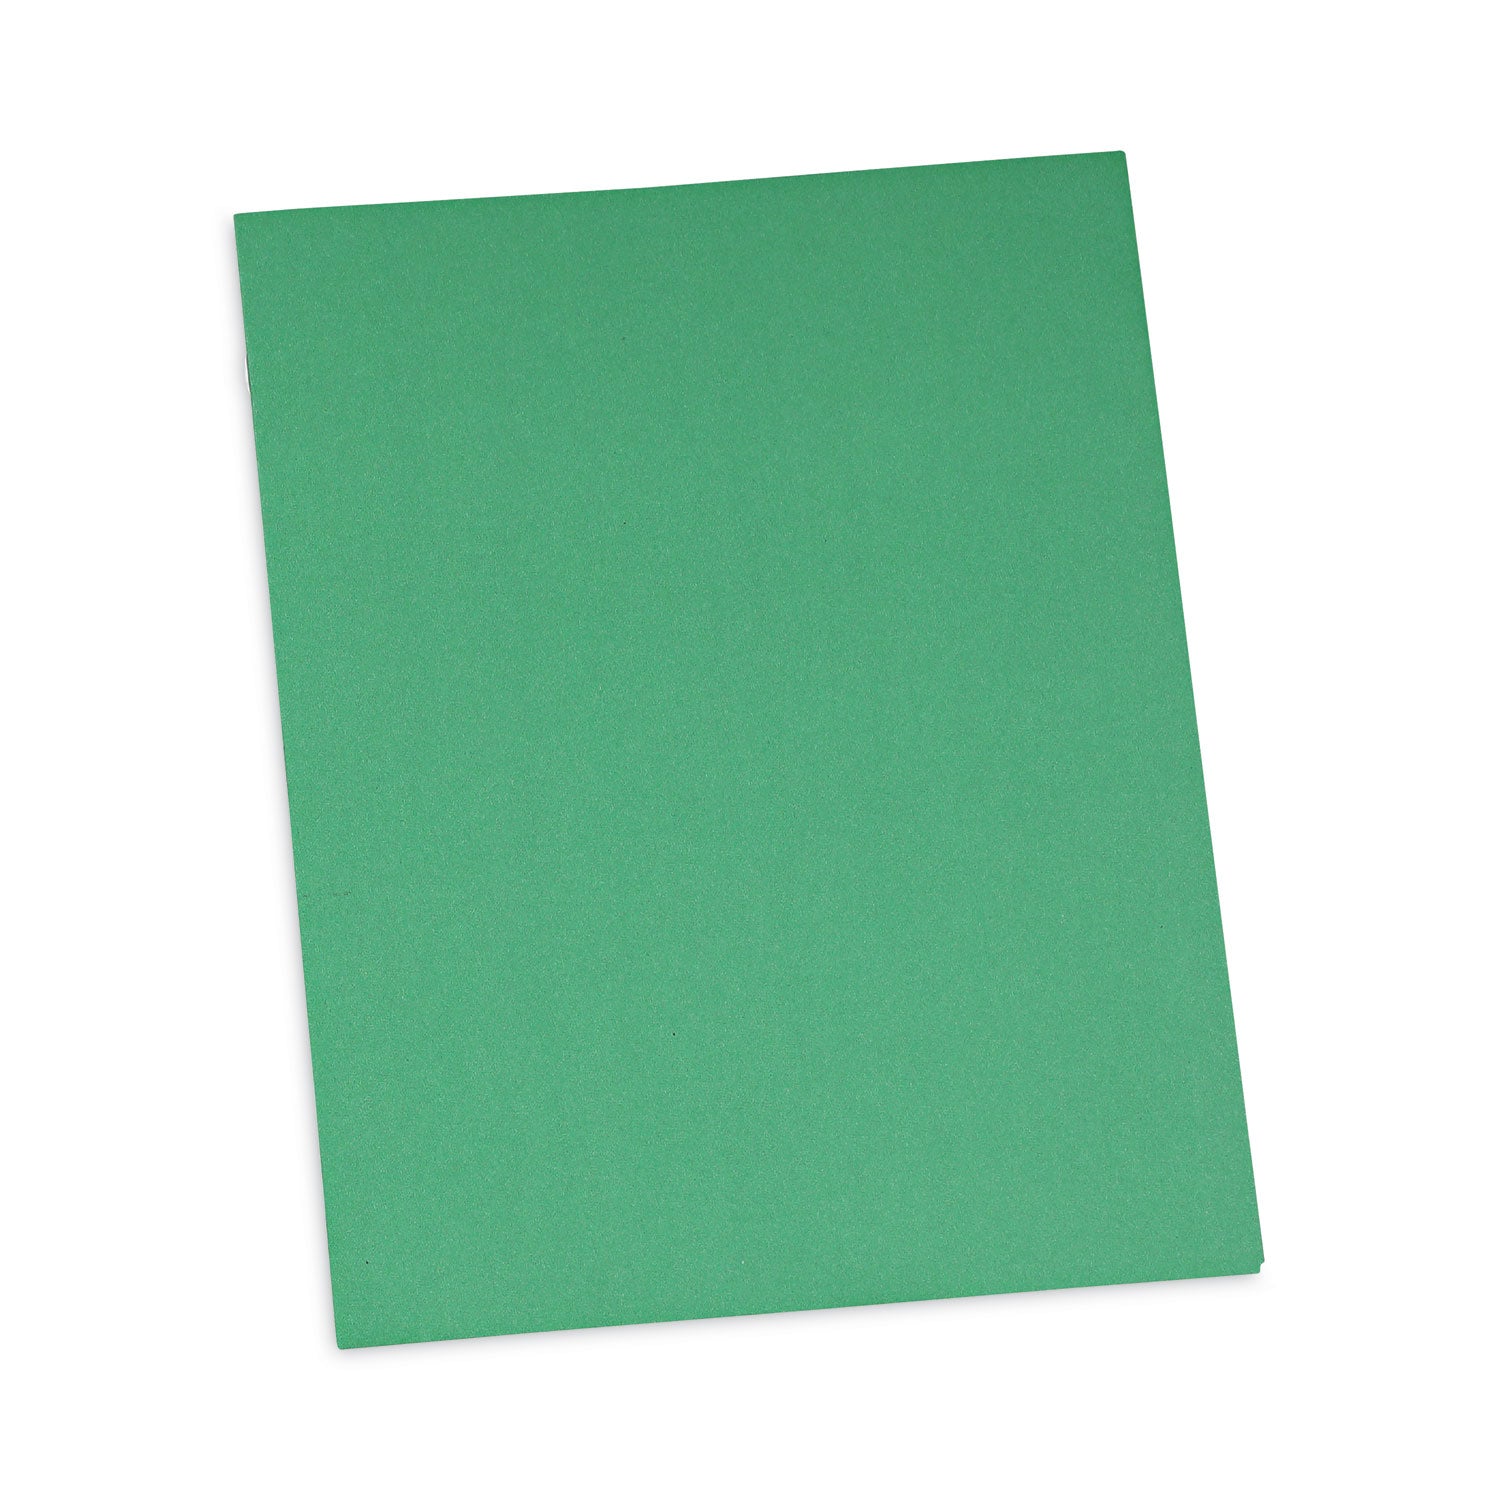 Two-Pocket Portfolios with Tang Fasteners, 0.5" Capacity, 11 x 8.5, Green, 25/Box - 